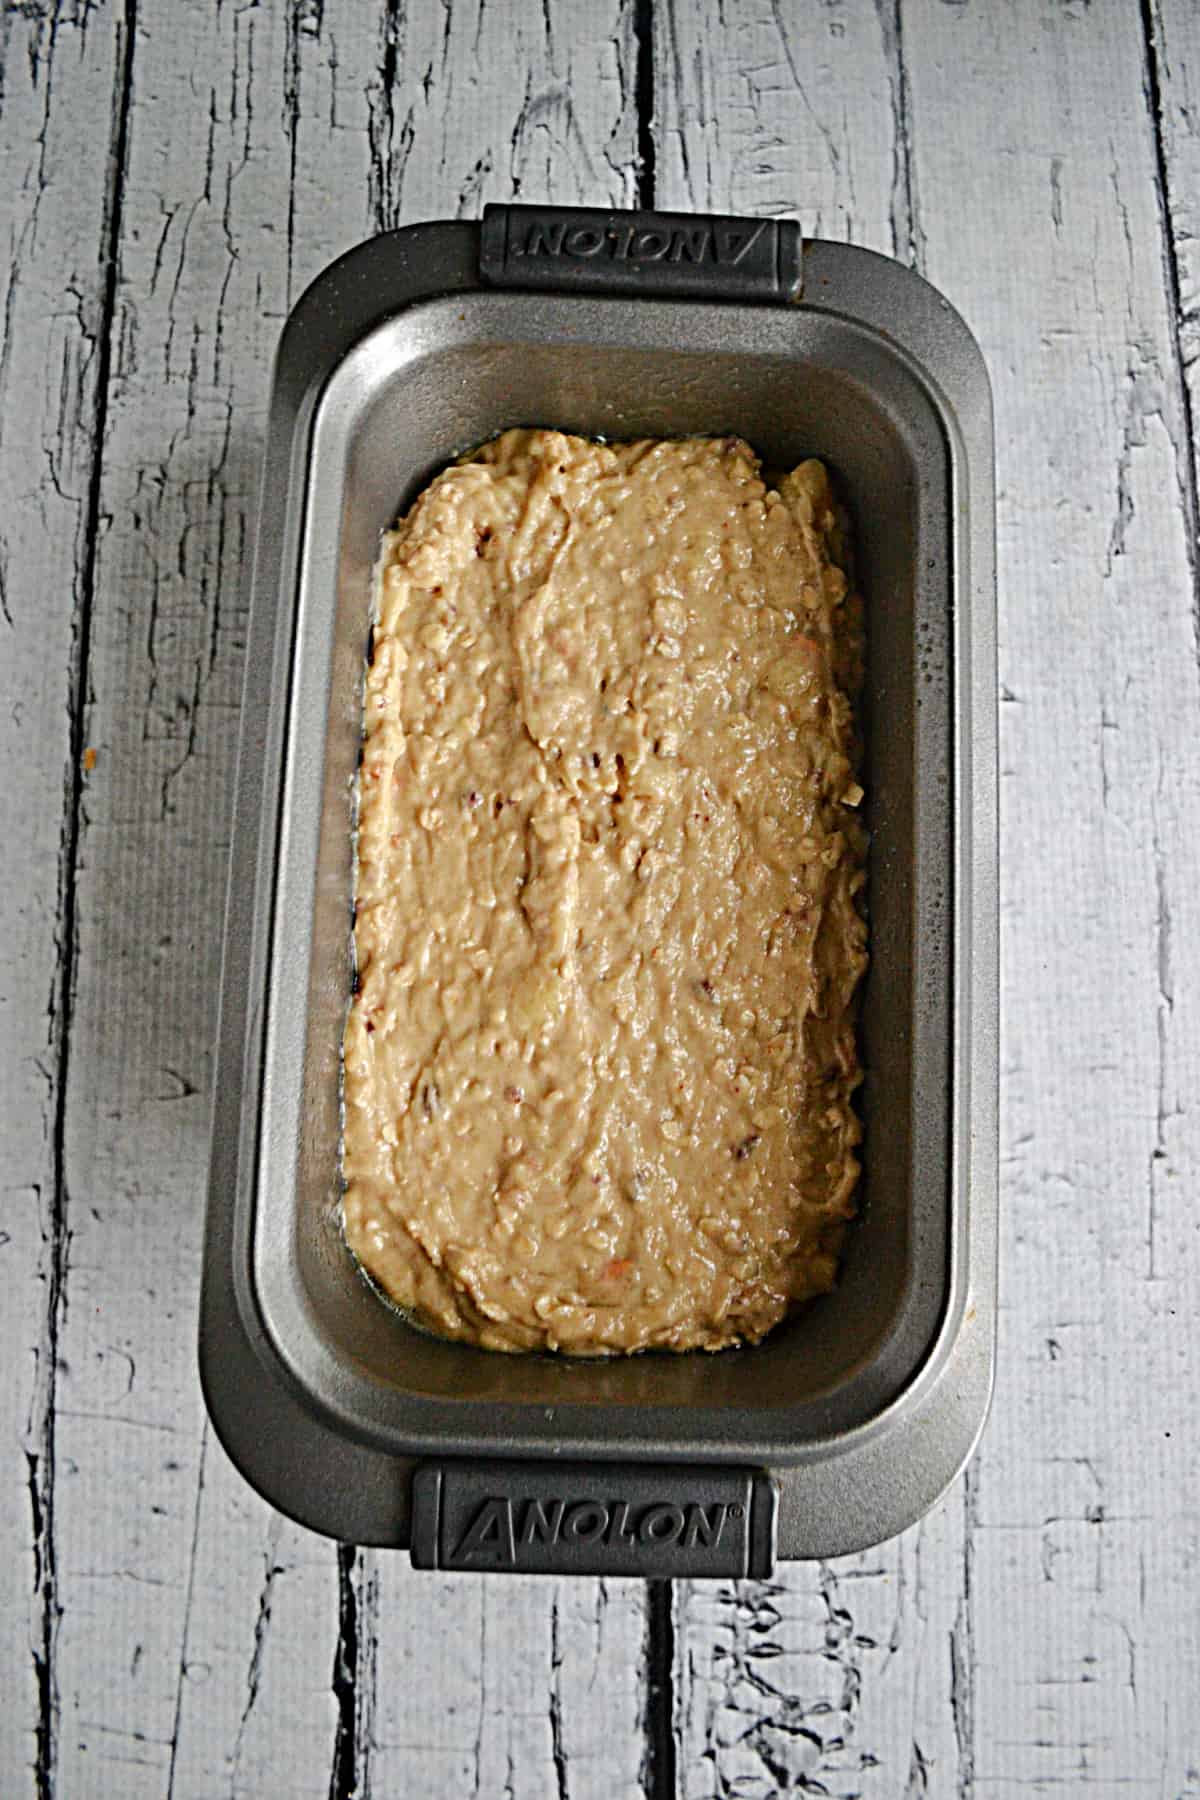 A pan with banana bread batter in it.